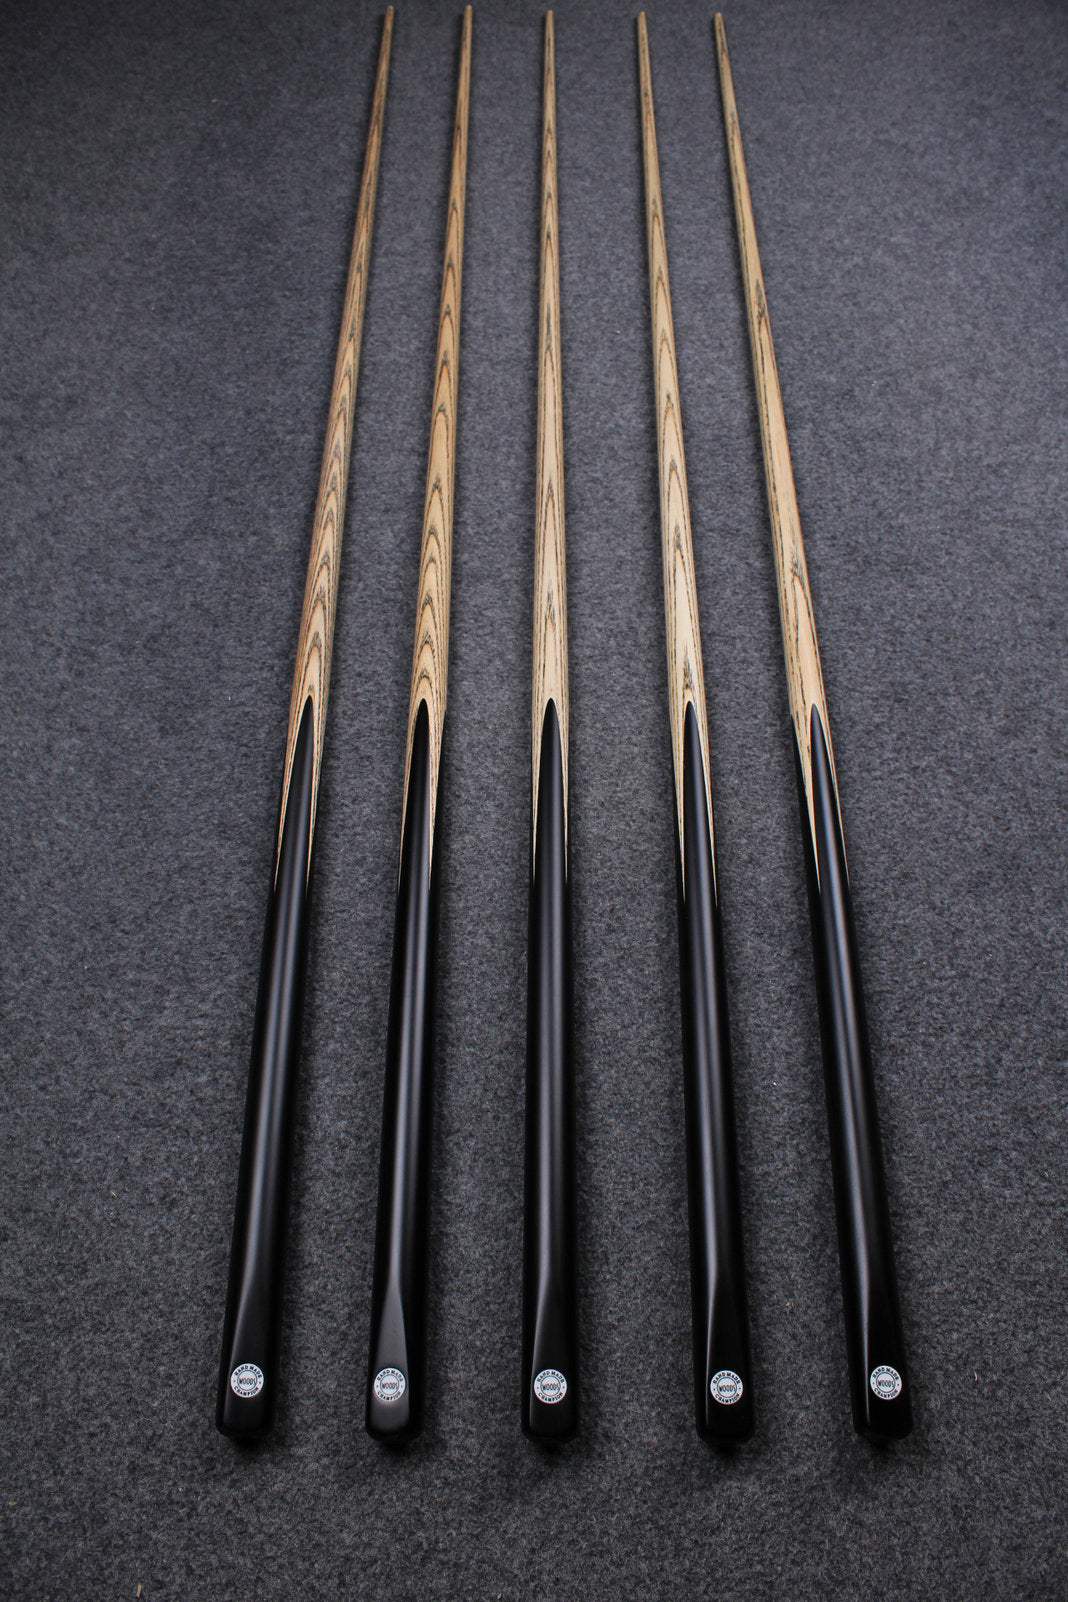 1 piece handmade ash snooker/ pool cue - variant length , variant tip size